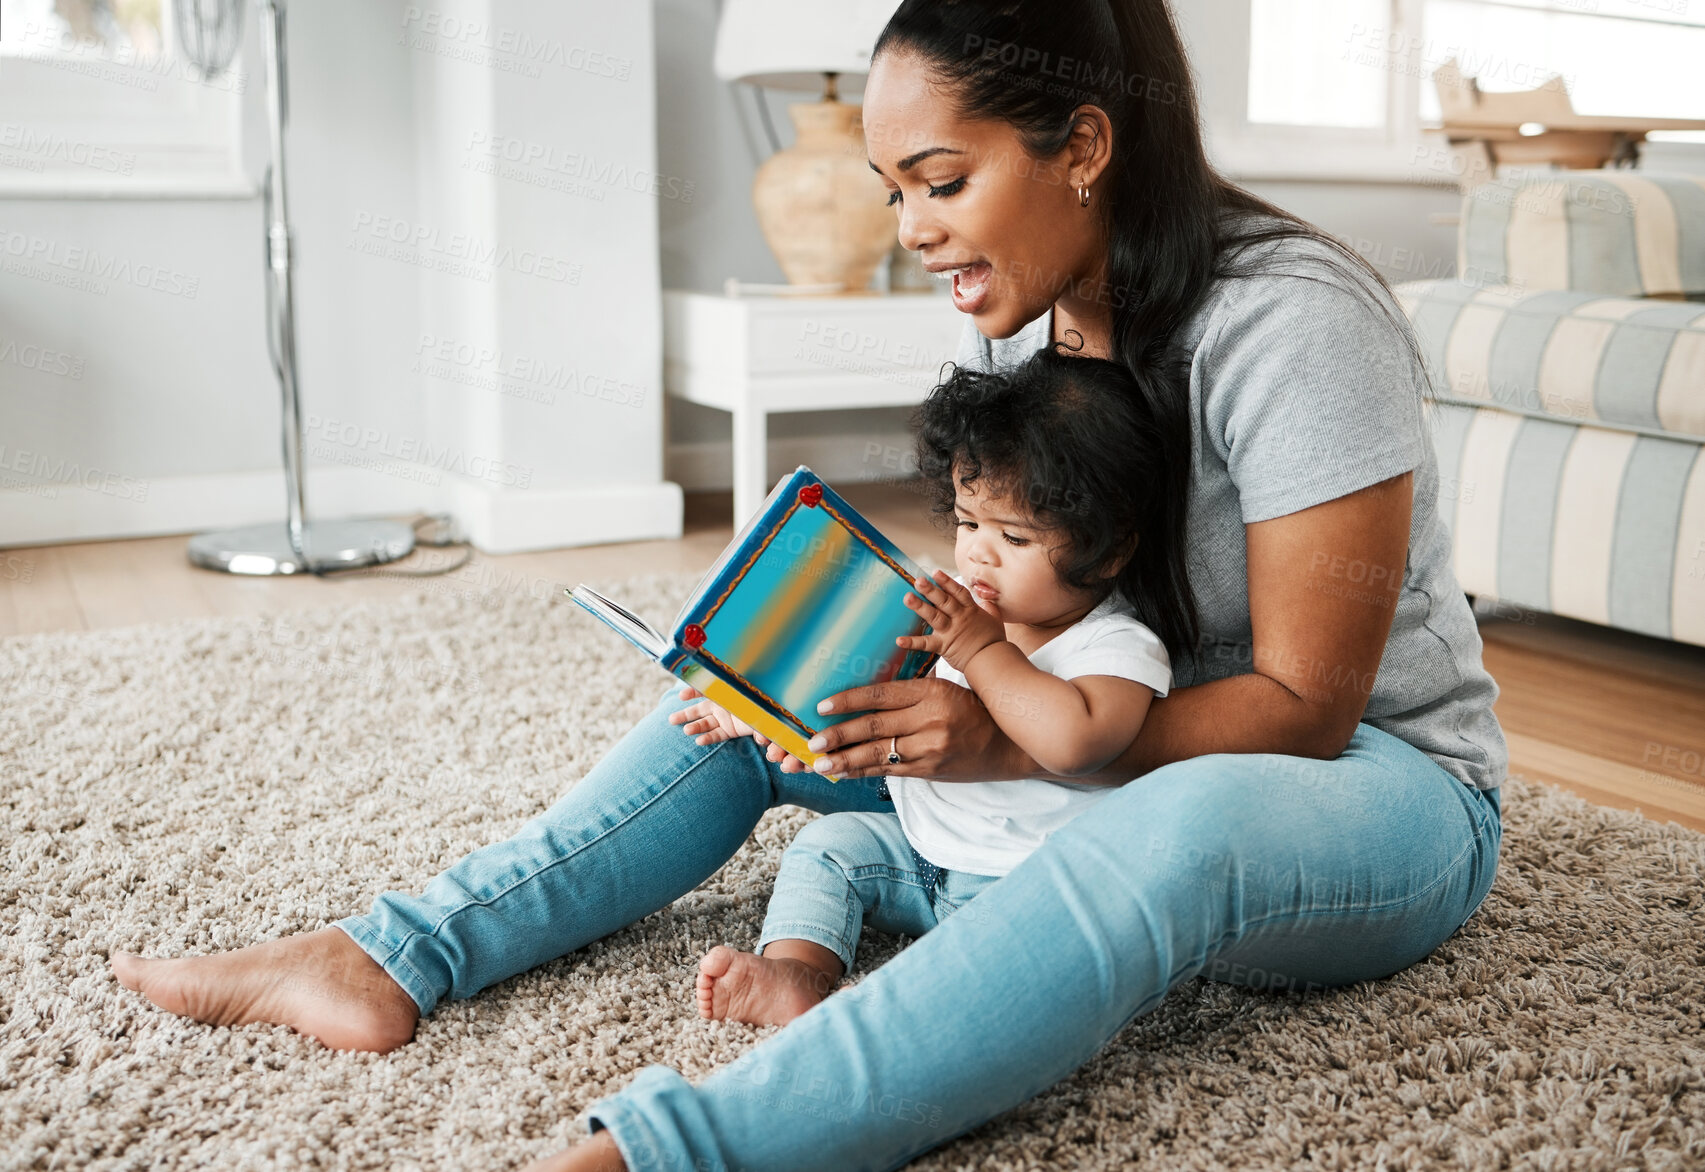 Buy stock photo Shot of a young mother reading to her baby girl